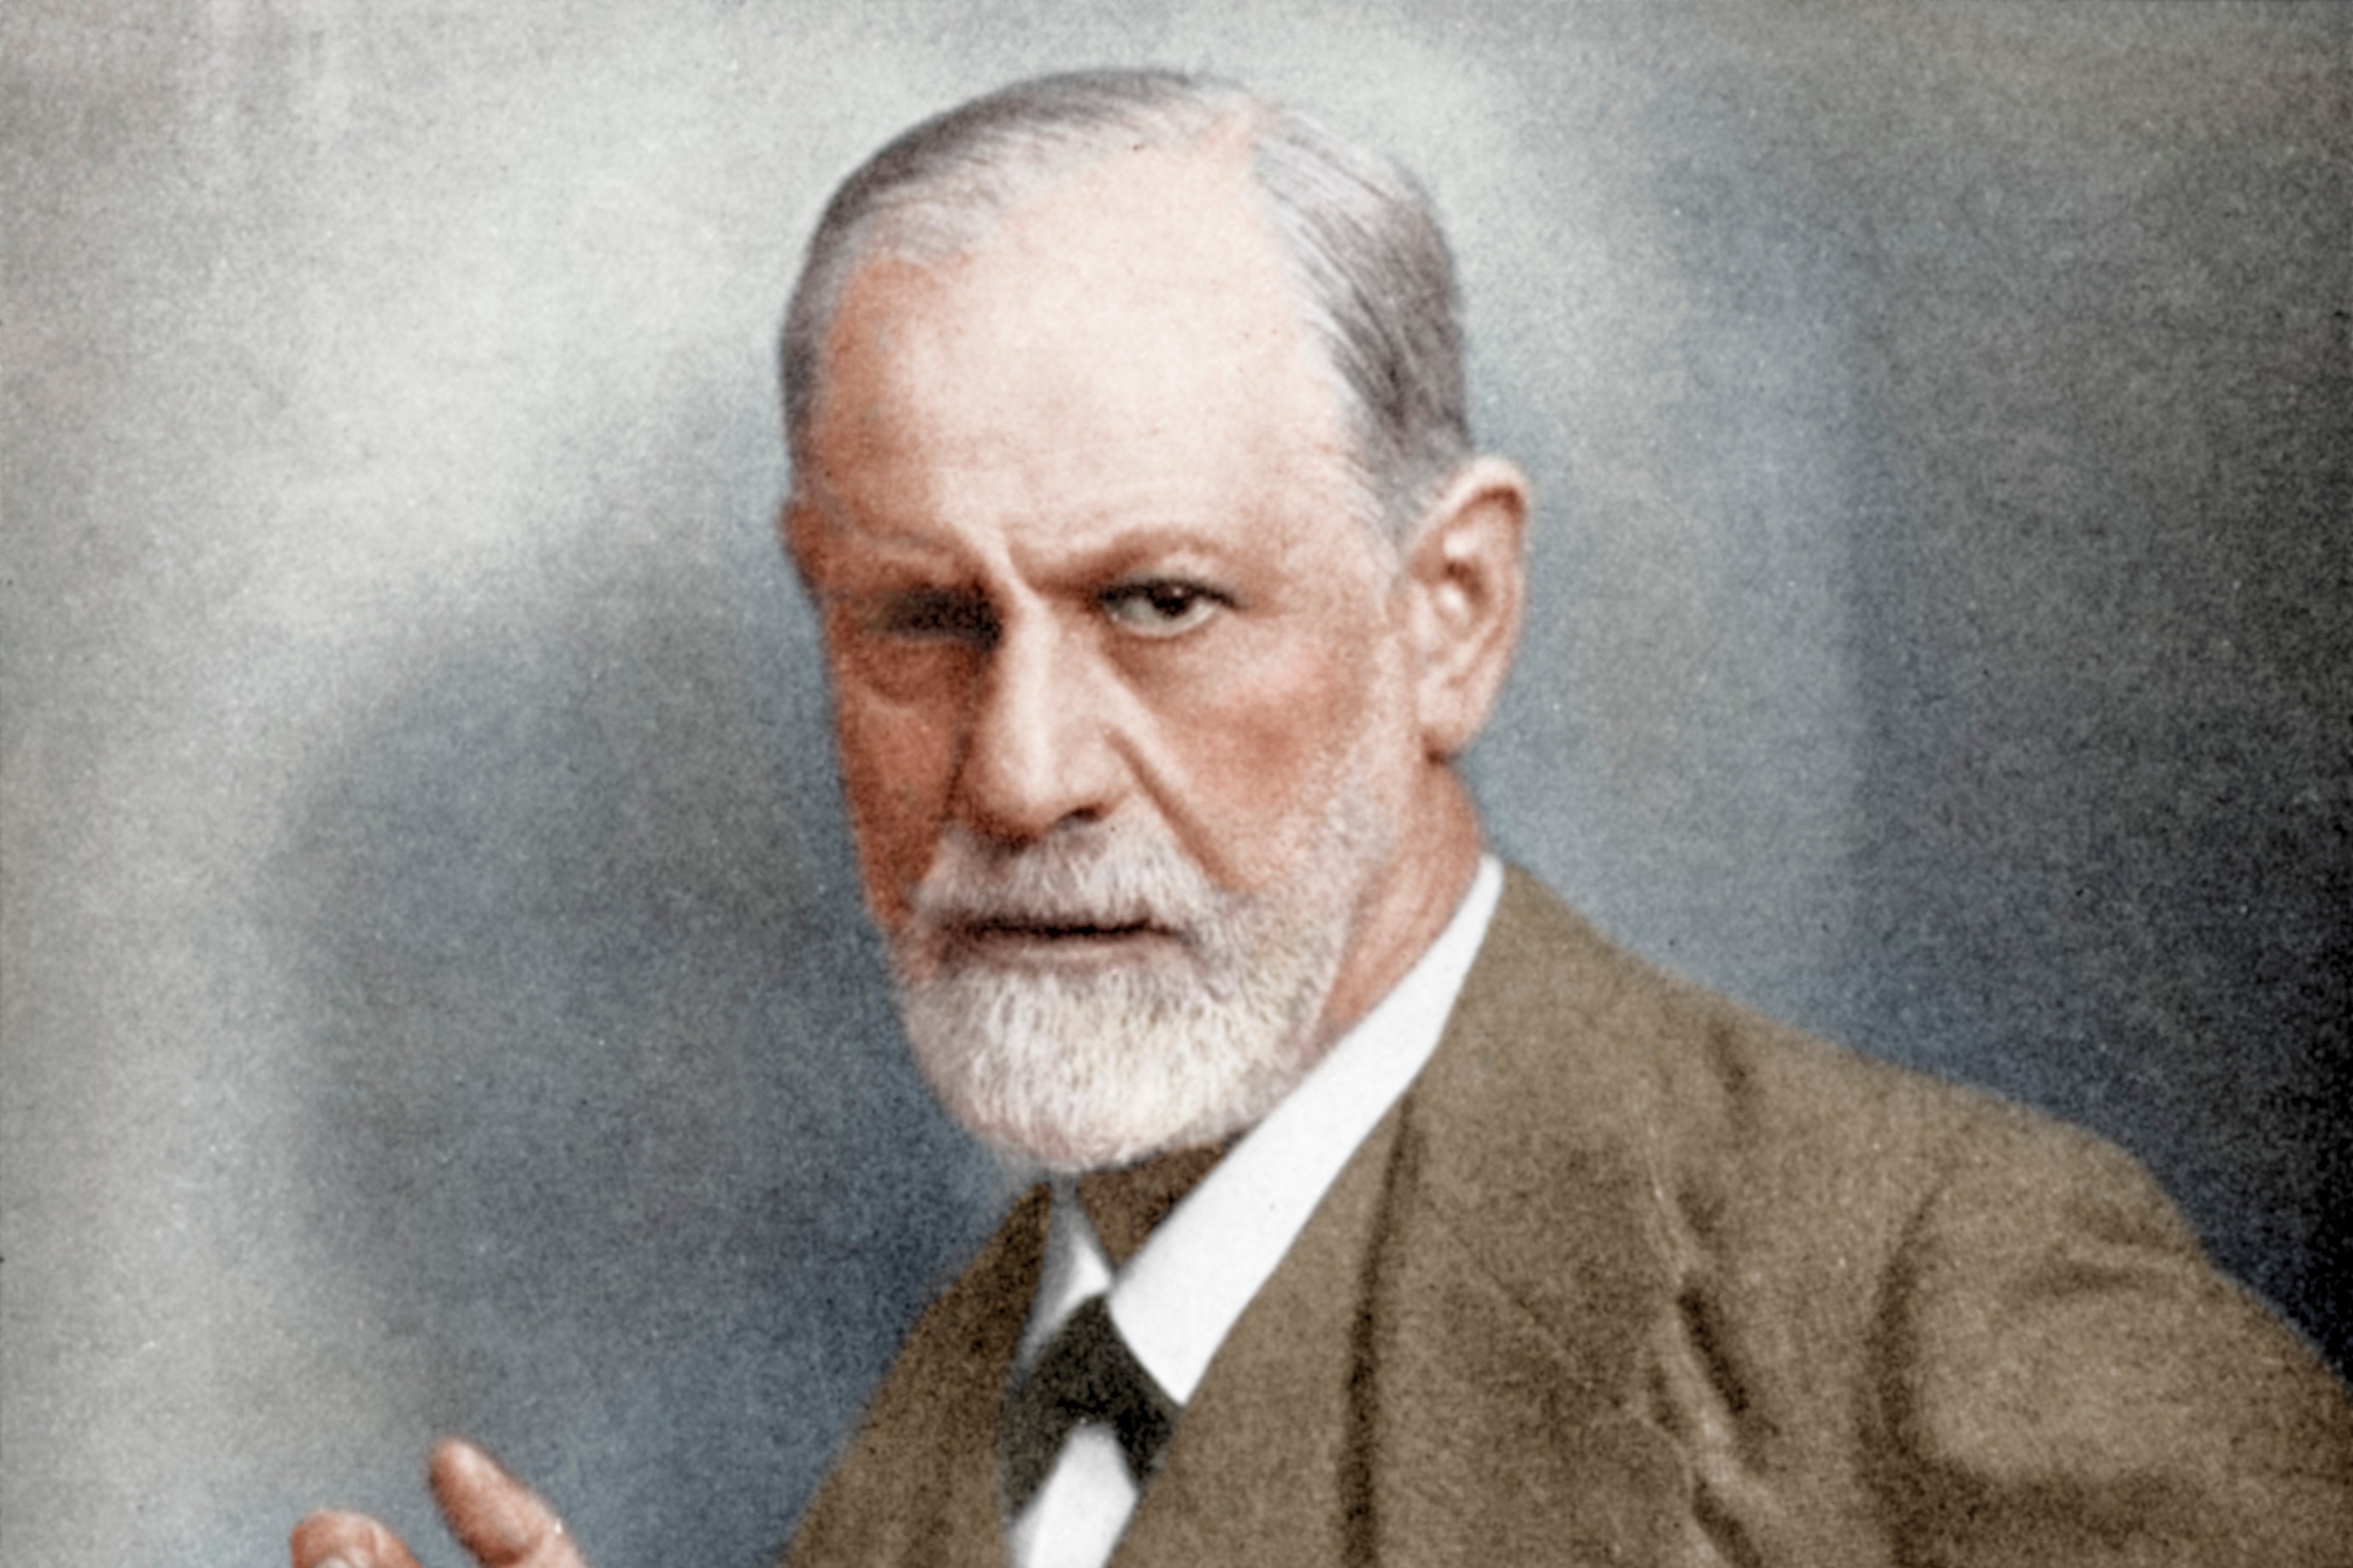 Sigmund Freud believed that conflicts in relationships were caused by subconscious emotions bubbling to the surface